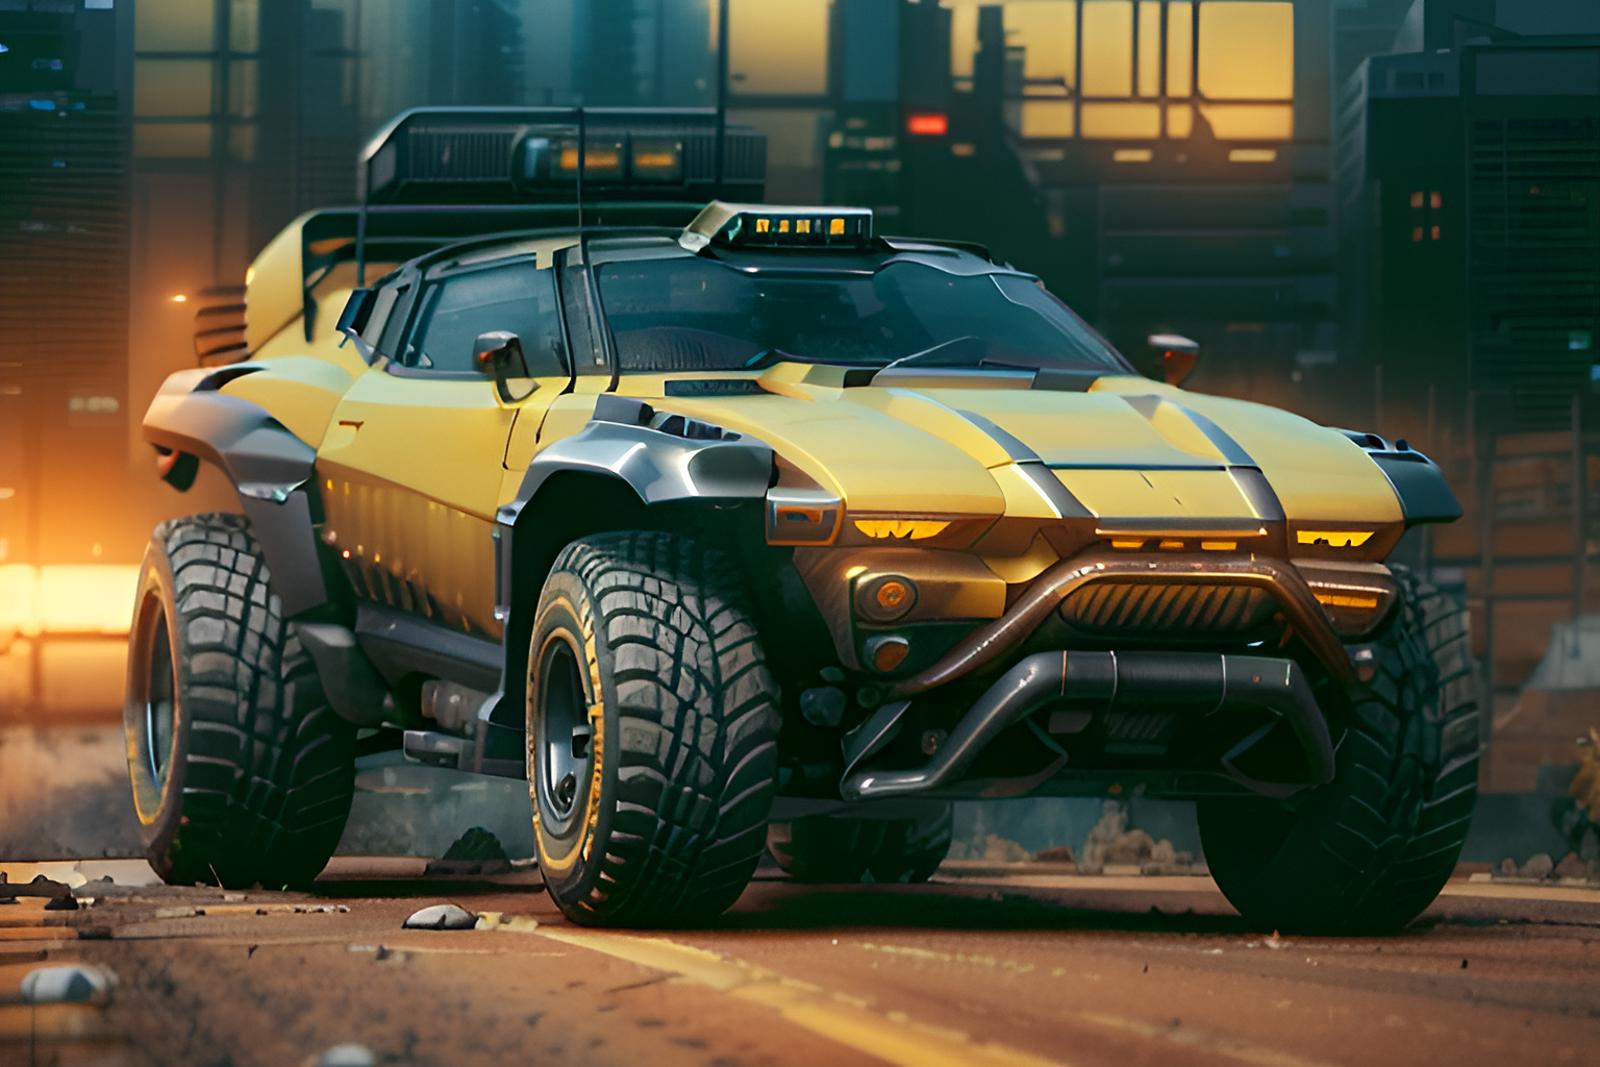 Cyberpunk Vehicles image by soullessartmachine